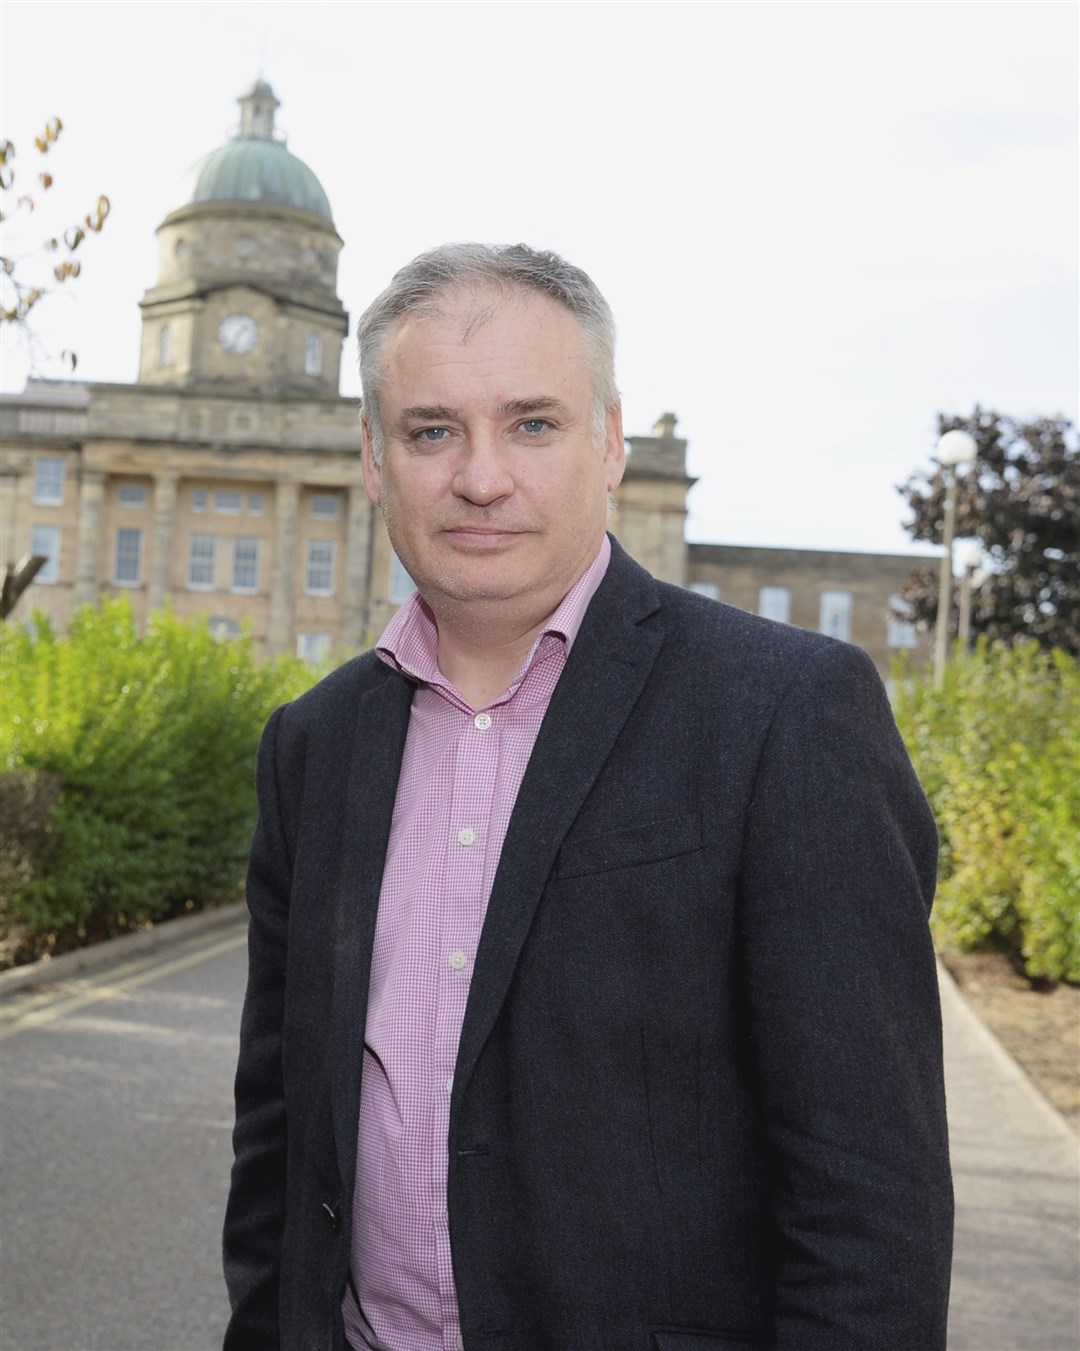 Moray MSP Richard Lochhead is calling on parents to "trust the facts" as the Scottish Government launches its annual national flu vaccination programme.